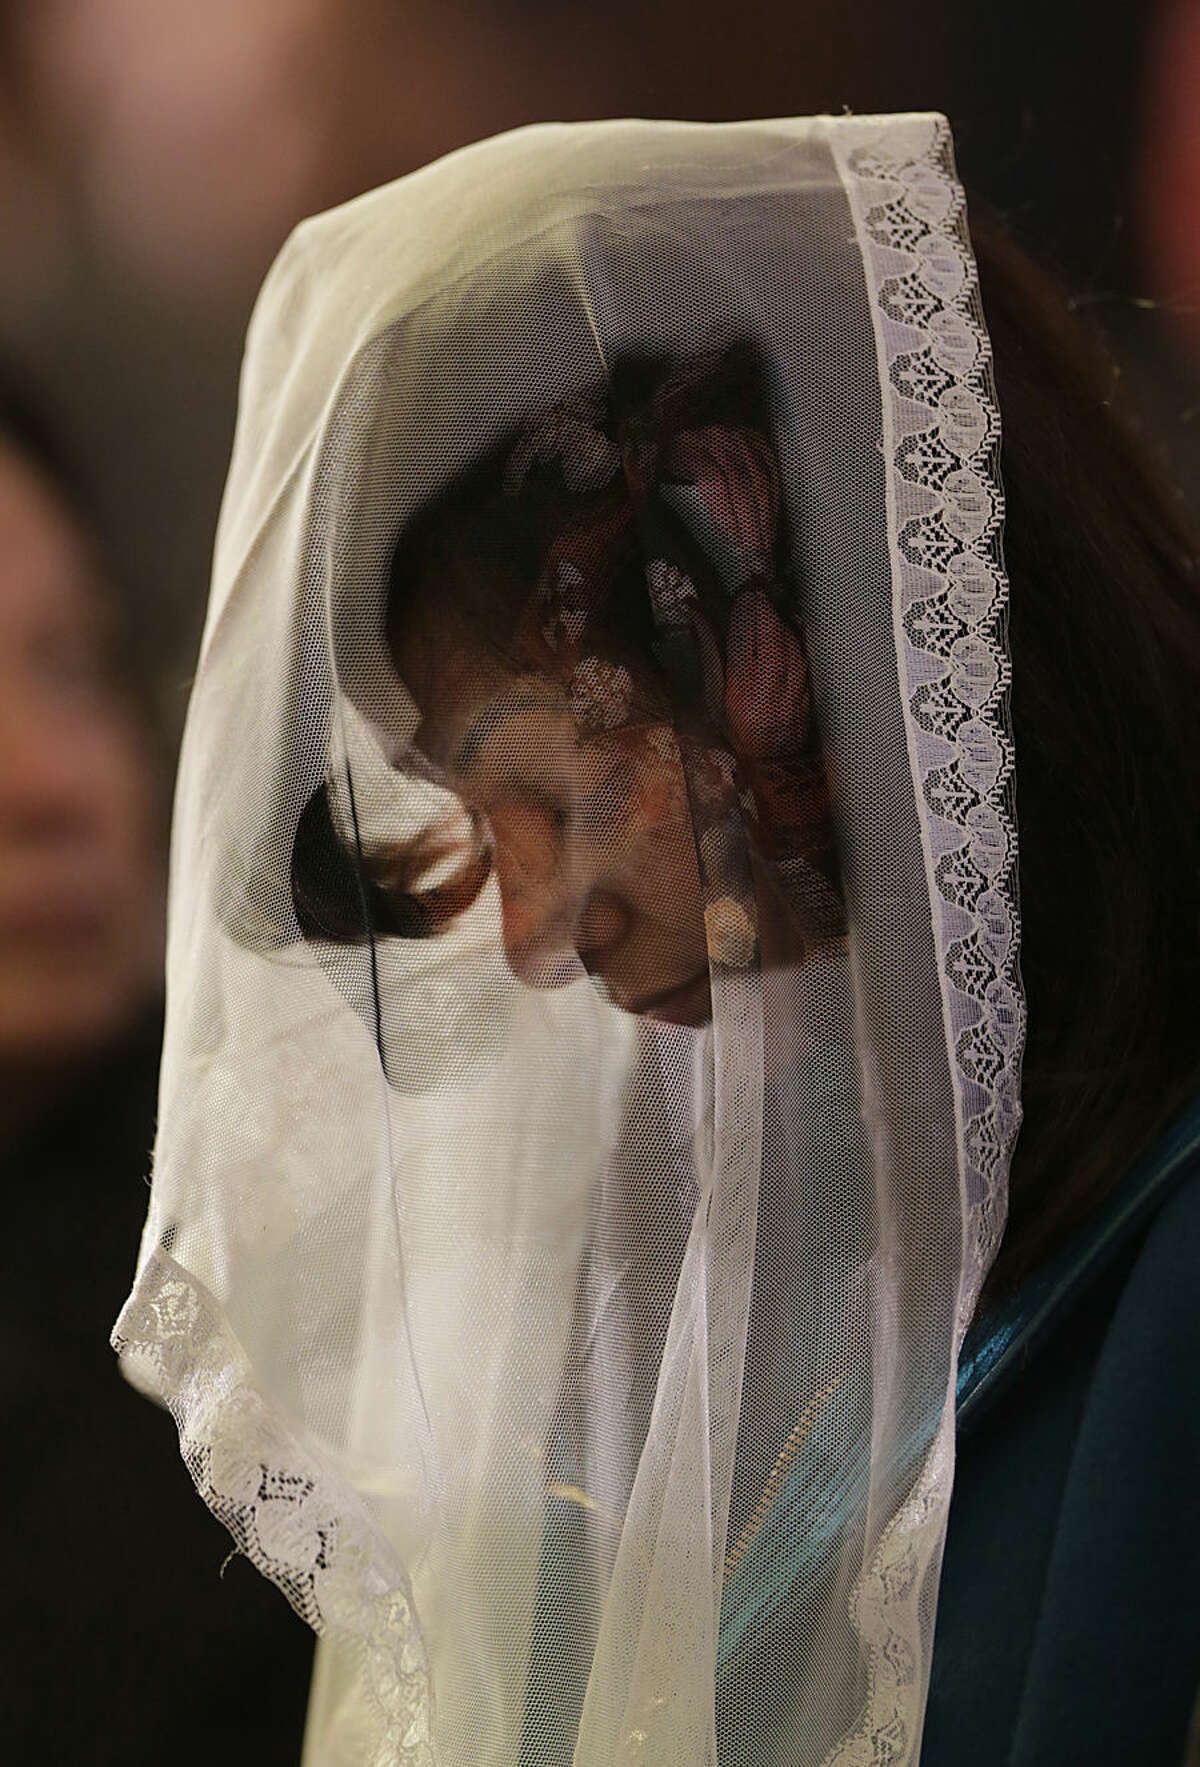 A woman prays during a mass lead by Pope Tawadros II, the 118th pope of the Coptic Church of Egypt, for the Egyptian Christians who were killed in Libya, at St. Mark's Cathedral in Cairo, Egypt, Tuesday, Feb. 17, 2015. An Islamic State video released on 15 February claimed to show the extremist group beheading 21 Egyptian Christians abducted in Libya more than a month ago. The Egyptian army responded on Feb. 16 by an airstrike against the militants targeting bases and weapons storage facilities in Libya. (AP Photo/Amr Nabil)